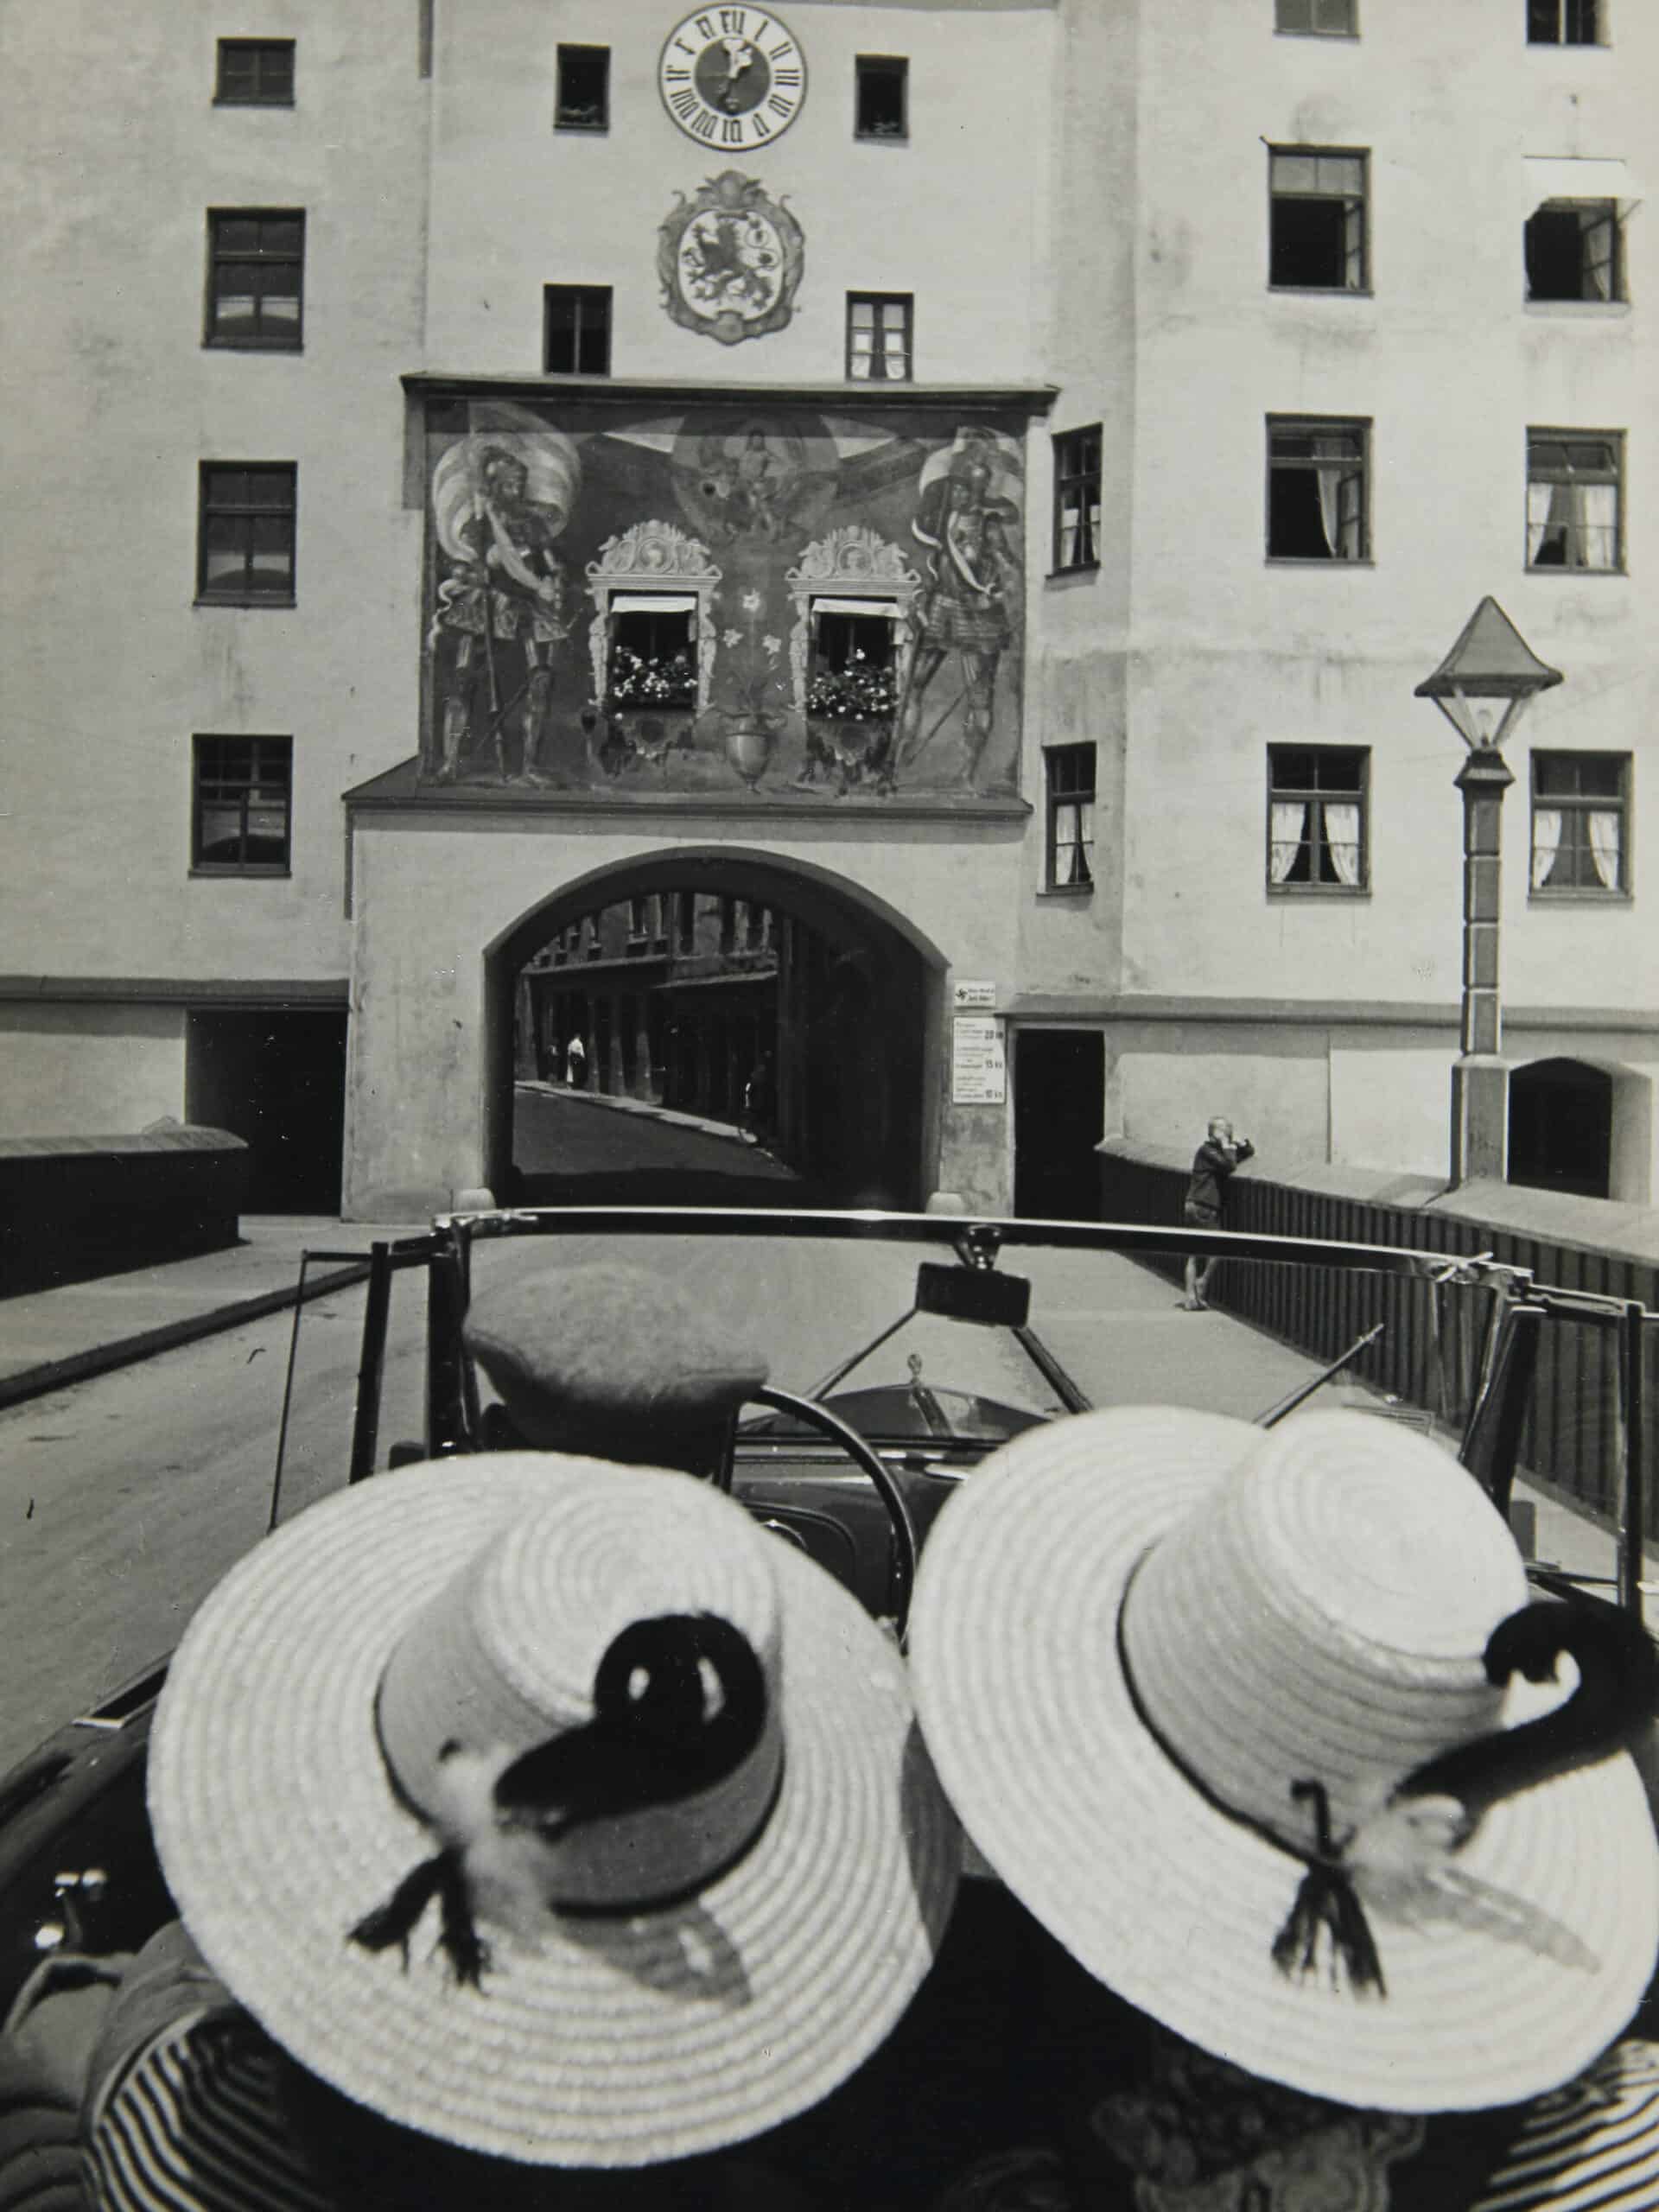 Entrance to the old town of Waterburg, ca. 1937 Tirage moderne – Modern print Collection Christian Skrein Photography